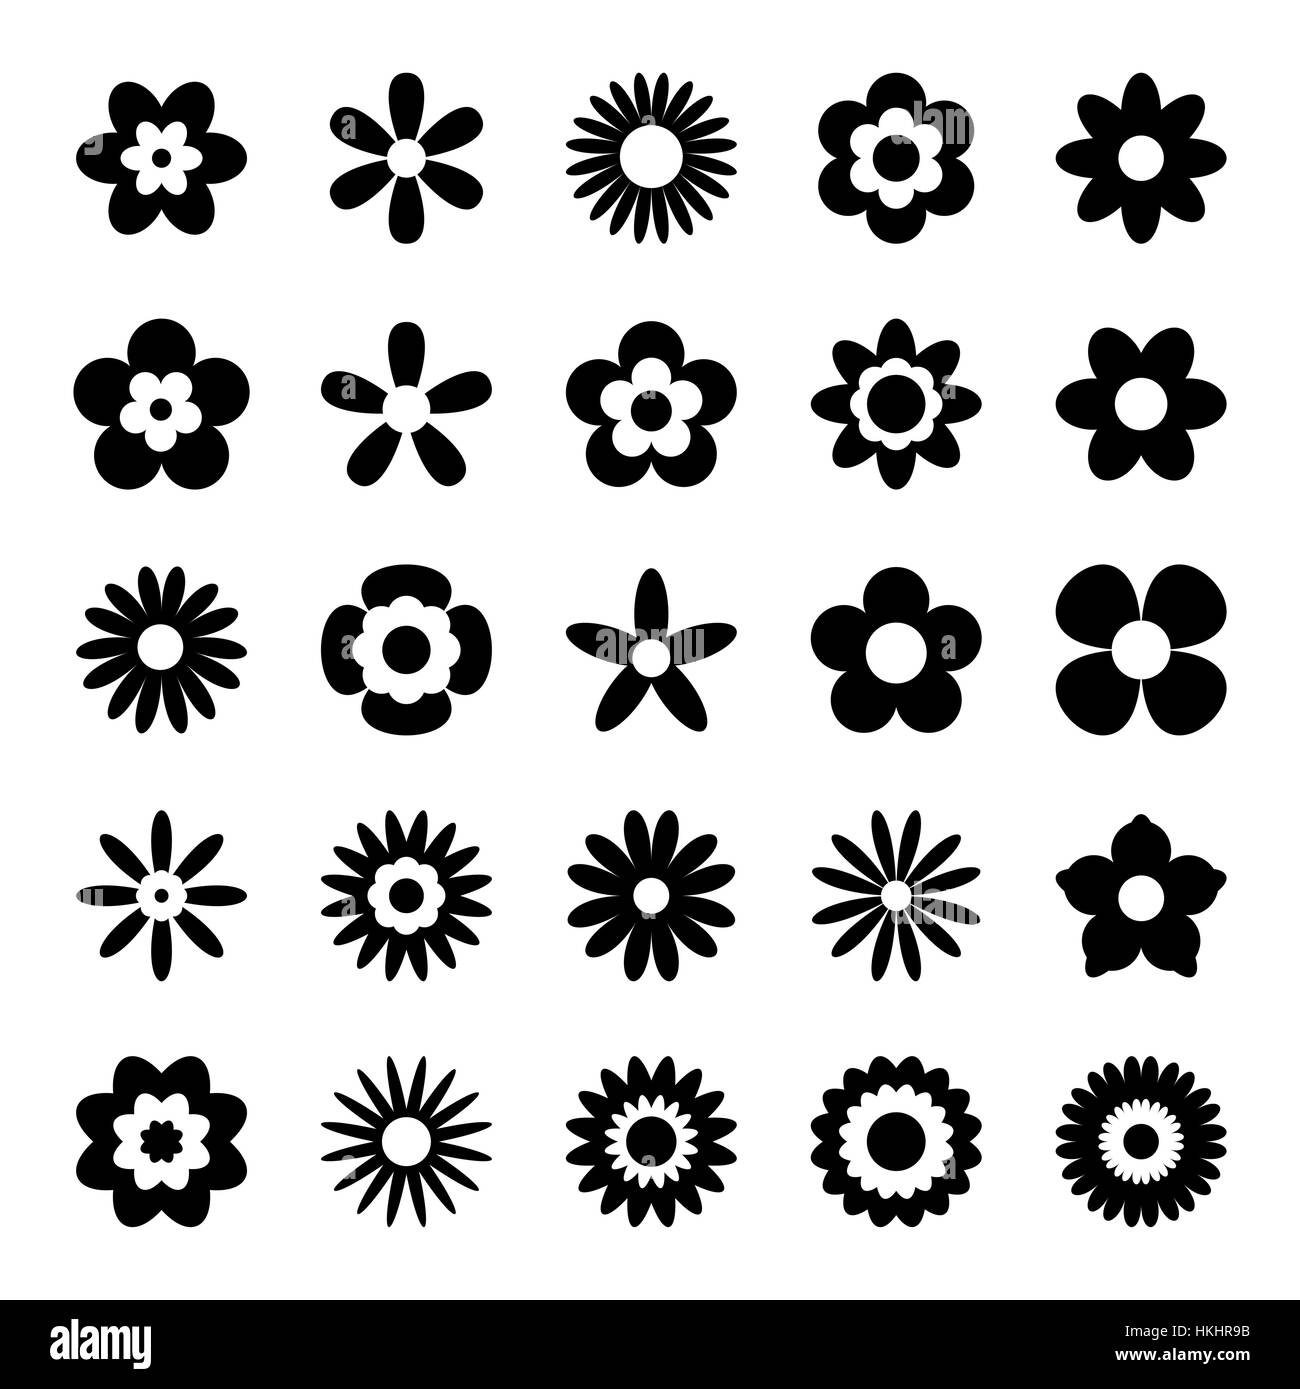 Set of Black Flower Icons Isolated on White Stock Vector